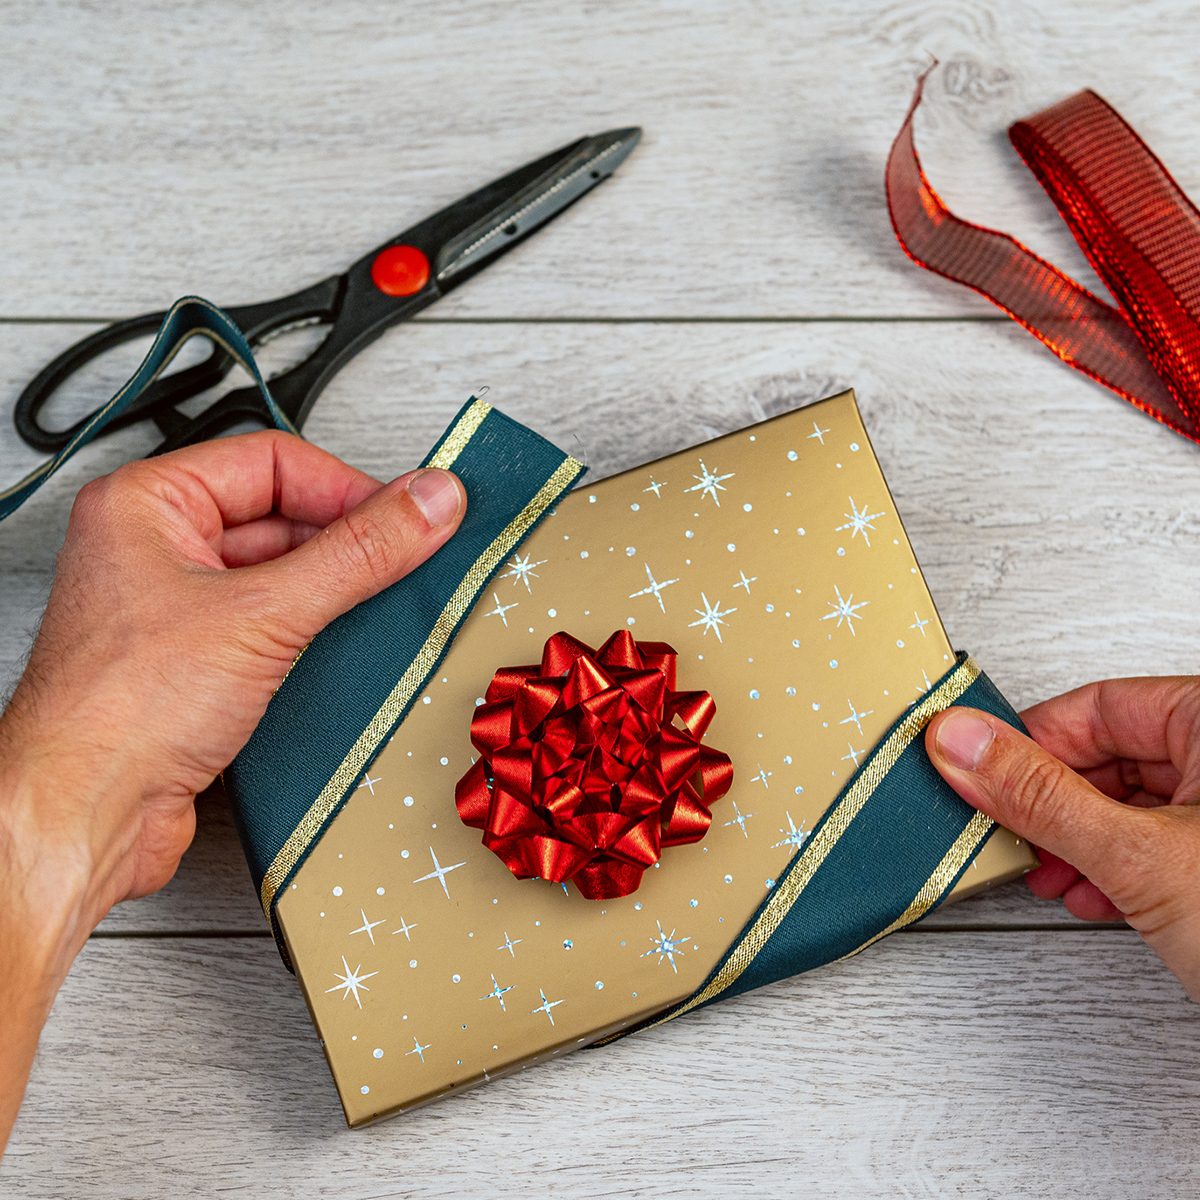 https://www.rd.com/wp-content/uploads/2021/11/50-christmas-wrapping-ideas_ribbon-corners.jpg?fit=700%2C700